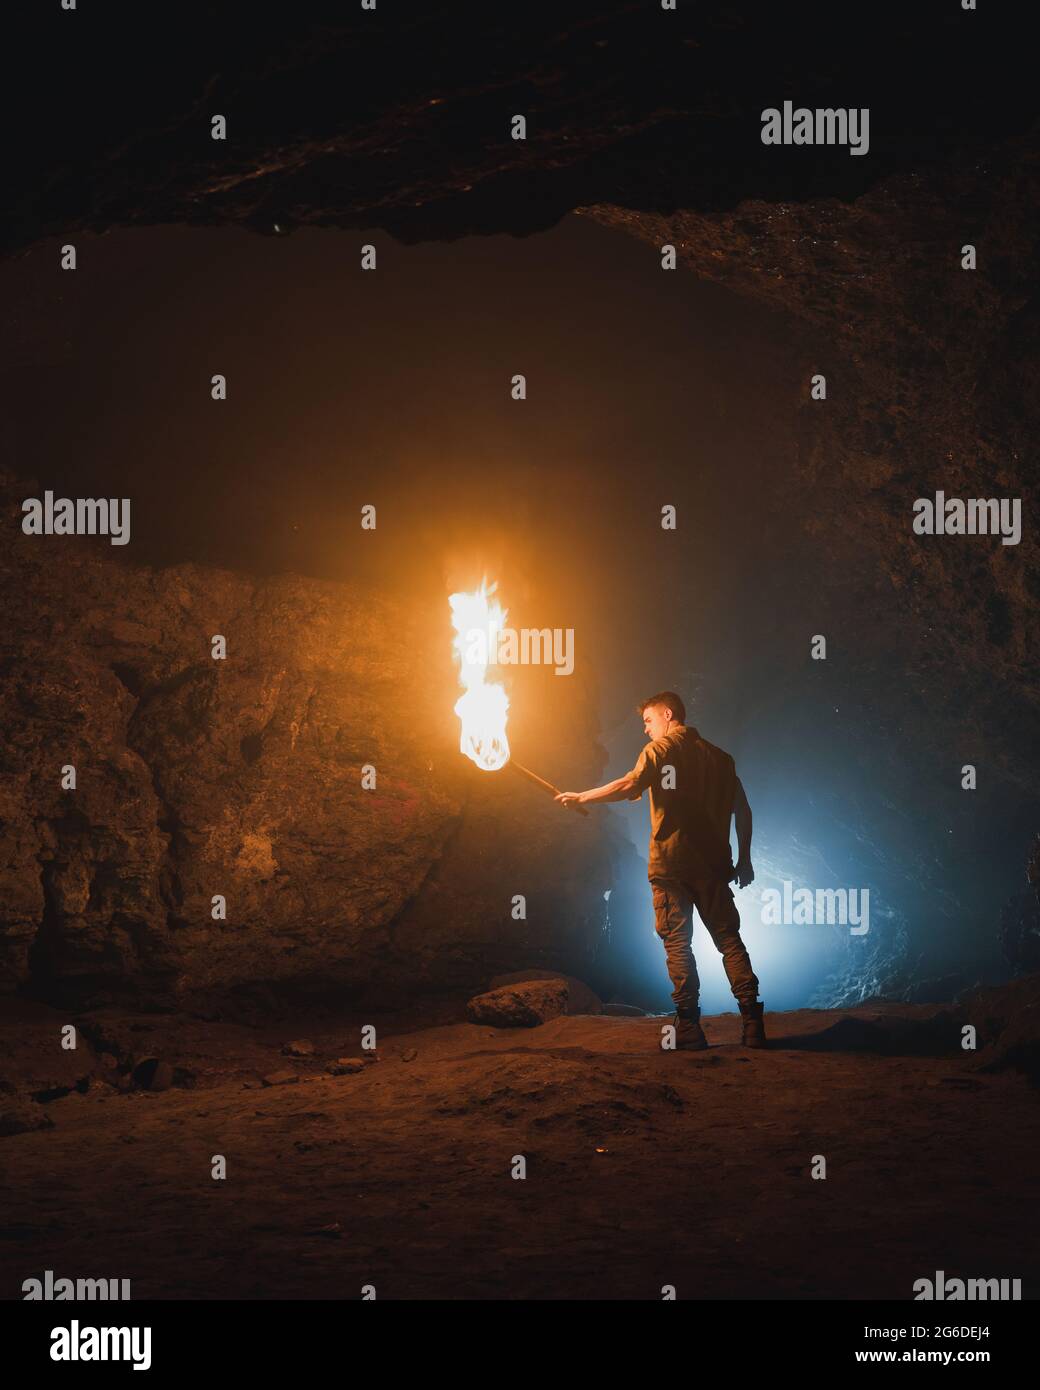 back view of young male speleologist with flaming torch standing in dark narrow rocky cave while exploring subterranean environment Stock Photo